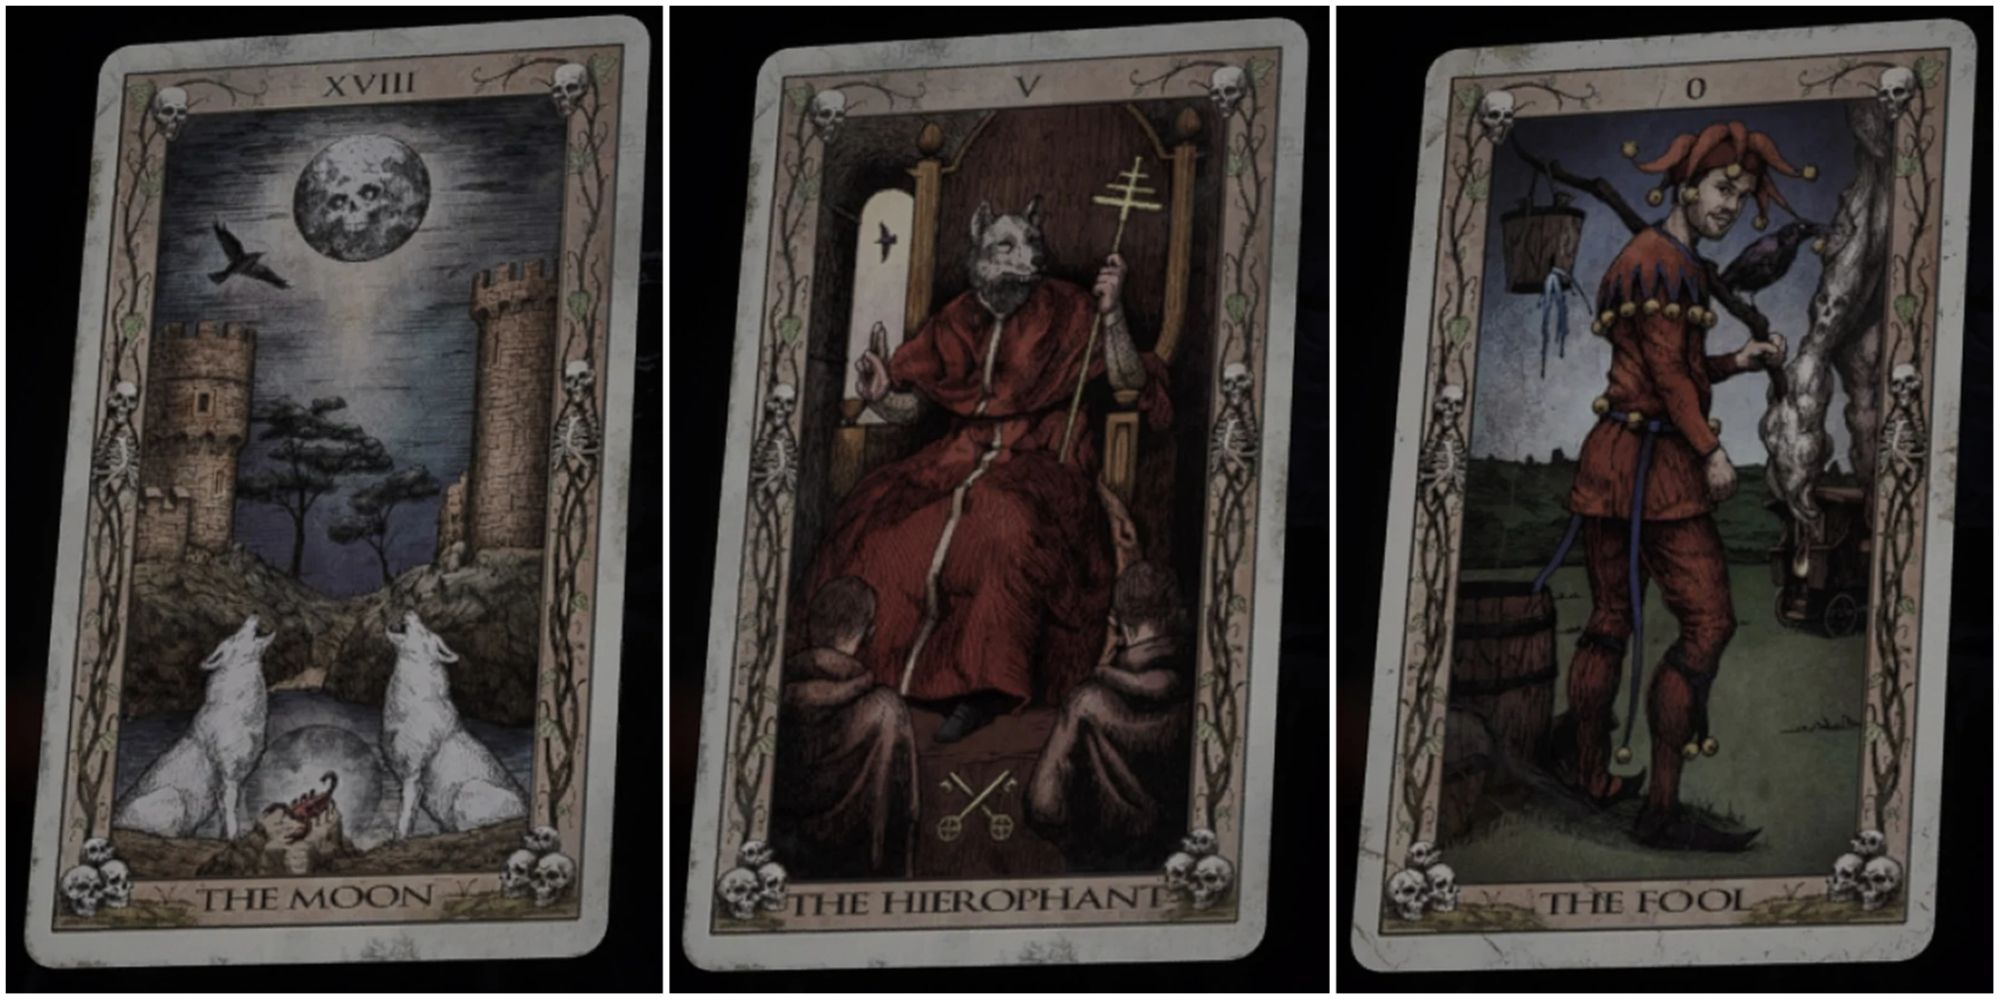 The Quarry Tarot Cards featuring the Quarry's rendition of the Major Arcana cards The Moon The Hierophant and the Fool